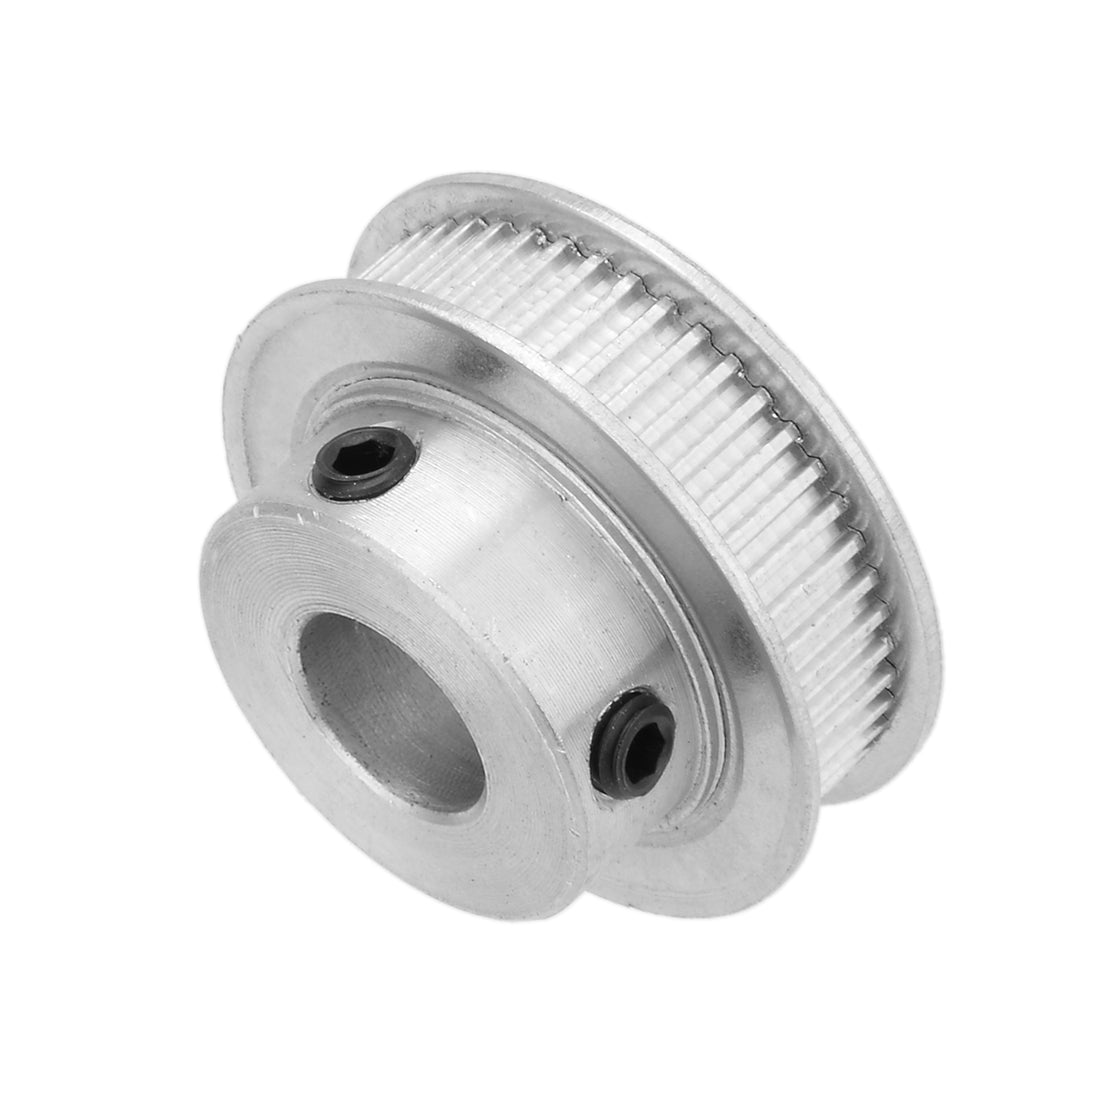 uxcell Uxcell Aluminum  50 Teeth 12mm Bore Timing Belt Idler Pulley Synchronous Wheel 6mm Belt for 3D Printer CNC